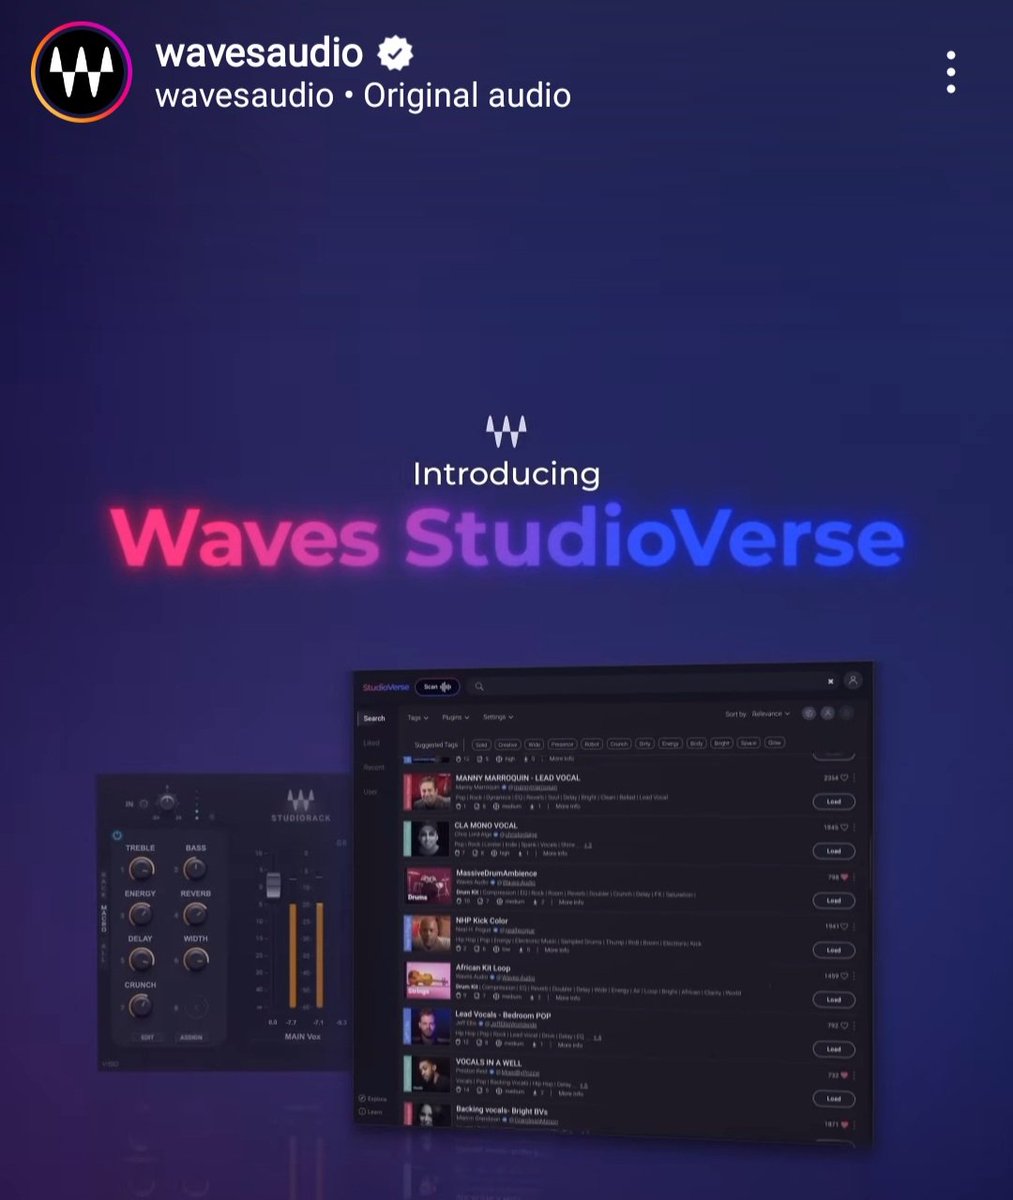 2/2
I'll use the last versions until they don't work anymore and then it's good-bye Waves (unless they come up with a better system until then)...

#wavesaudio #wavessucks #wavesplugins #chriswirsig #filmcomposer #tvcomposer